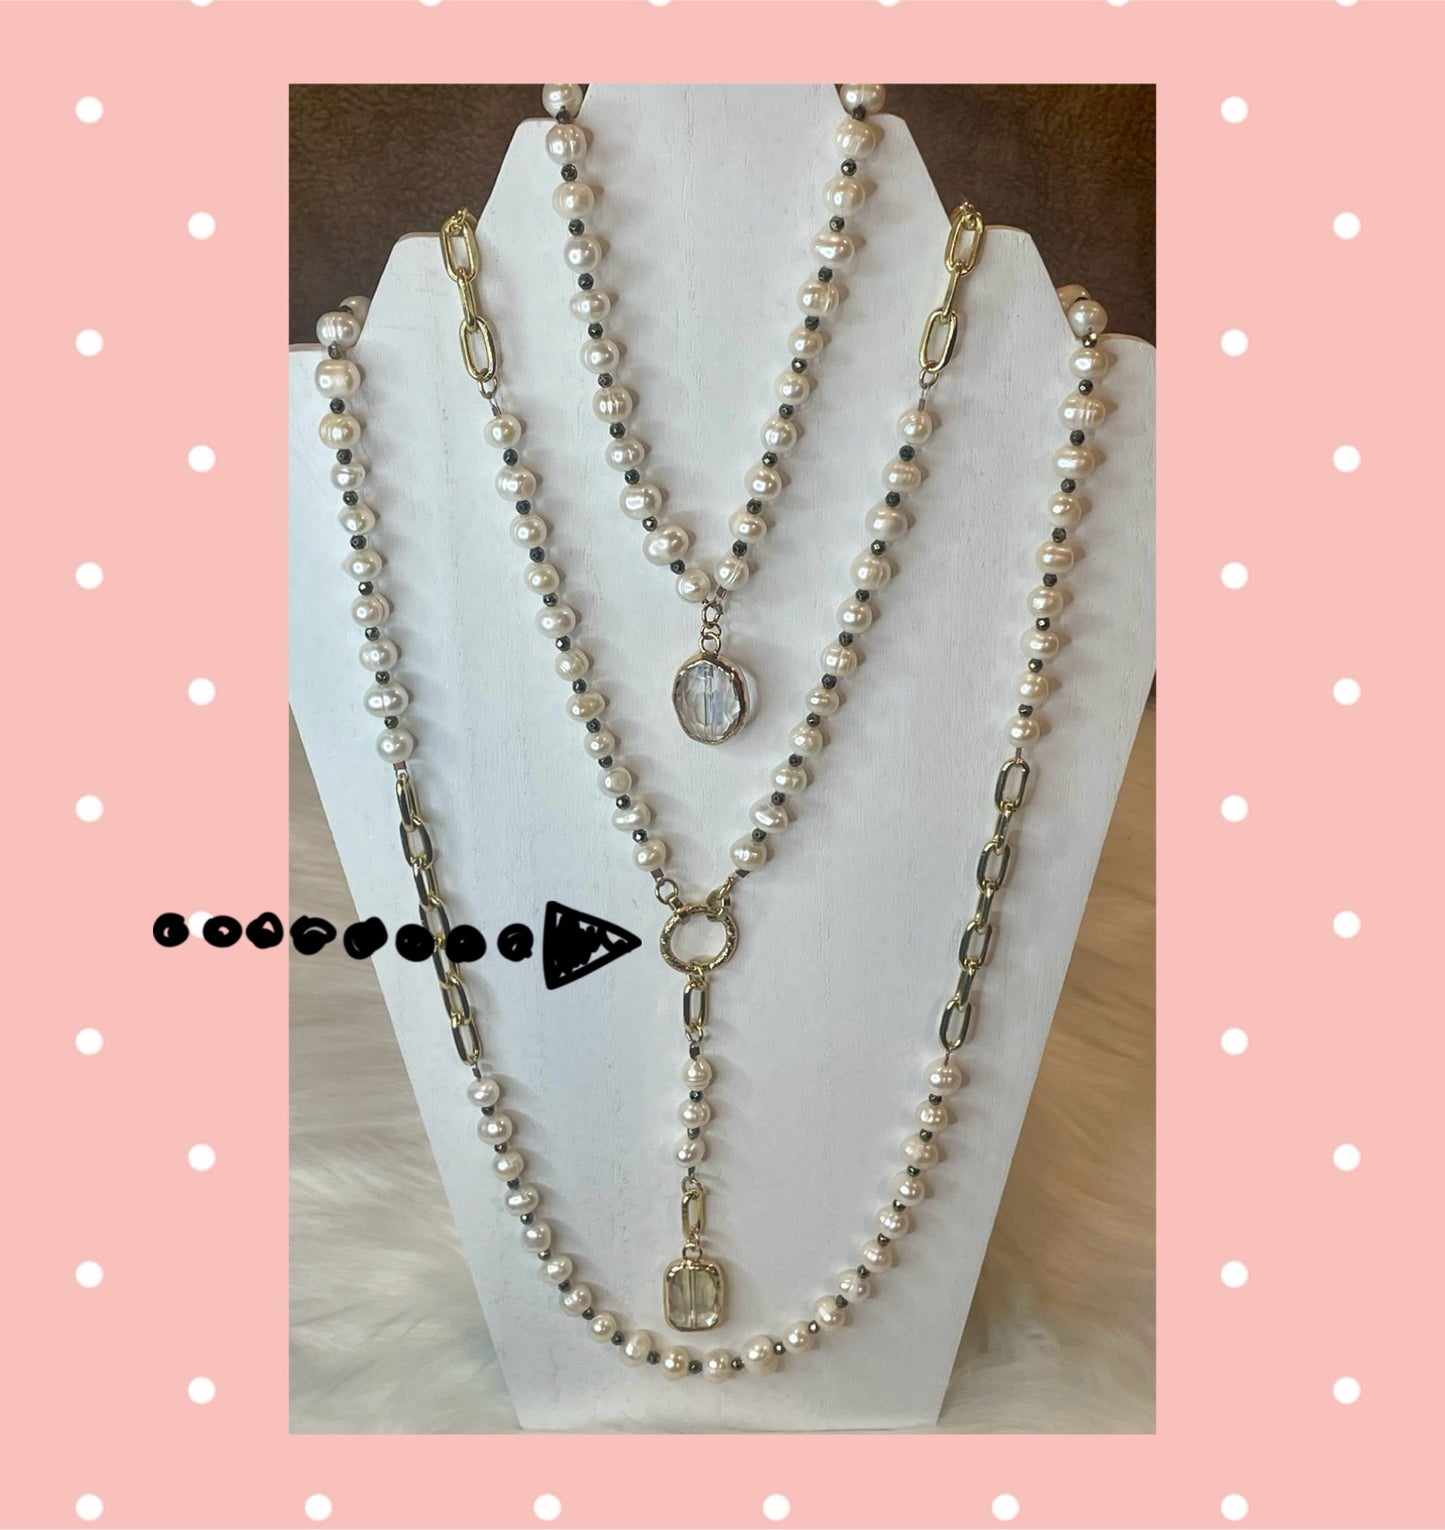 Long lariat pearl necklace with faceted crystal drop